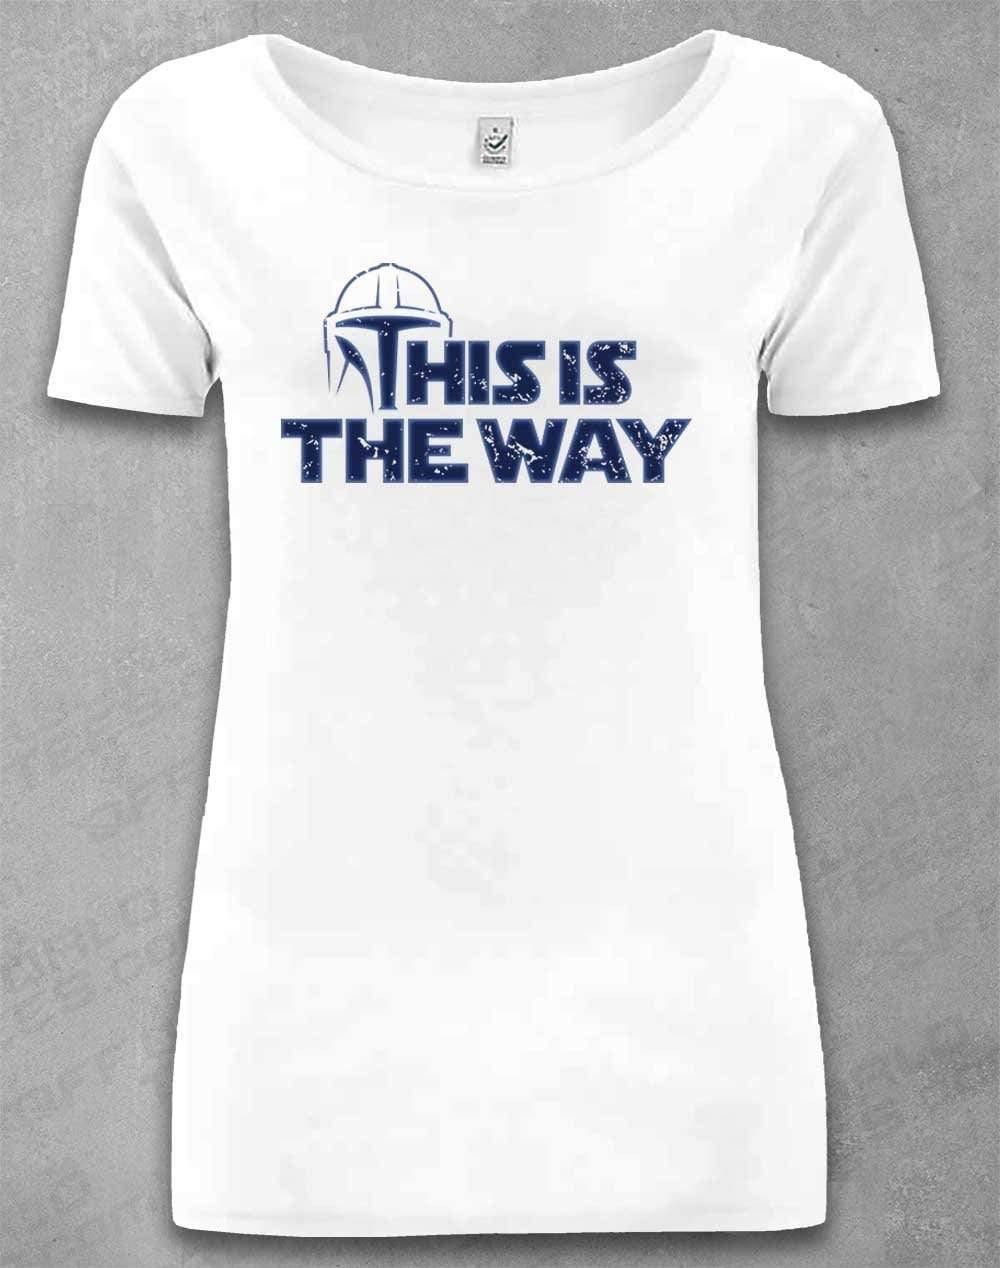 DELUXE This is the Way - Organic Scoop Neck T-Shirt 8-10 / White  - Off World Tees